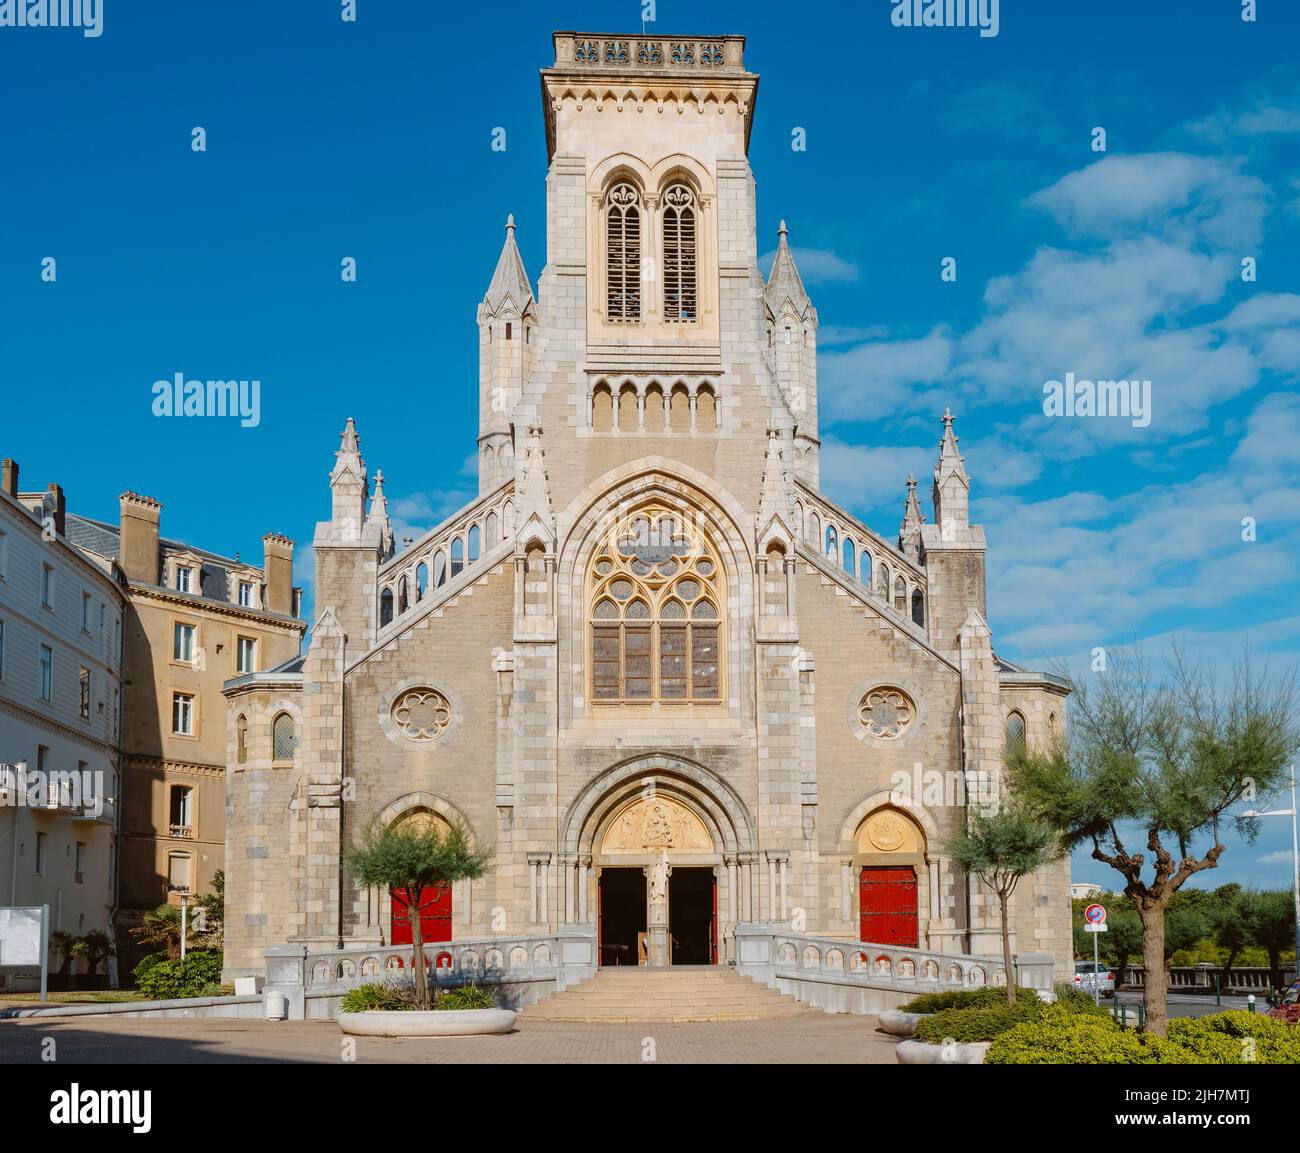 a view of the main facade of the Sainte-Eugenie Church in Biarritz, France Stock Photo